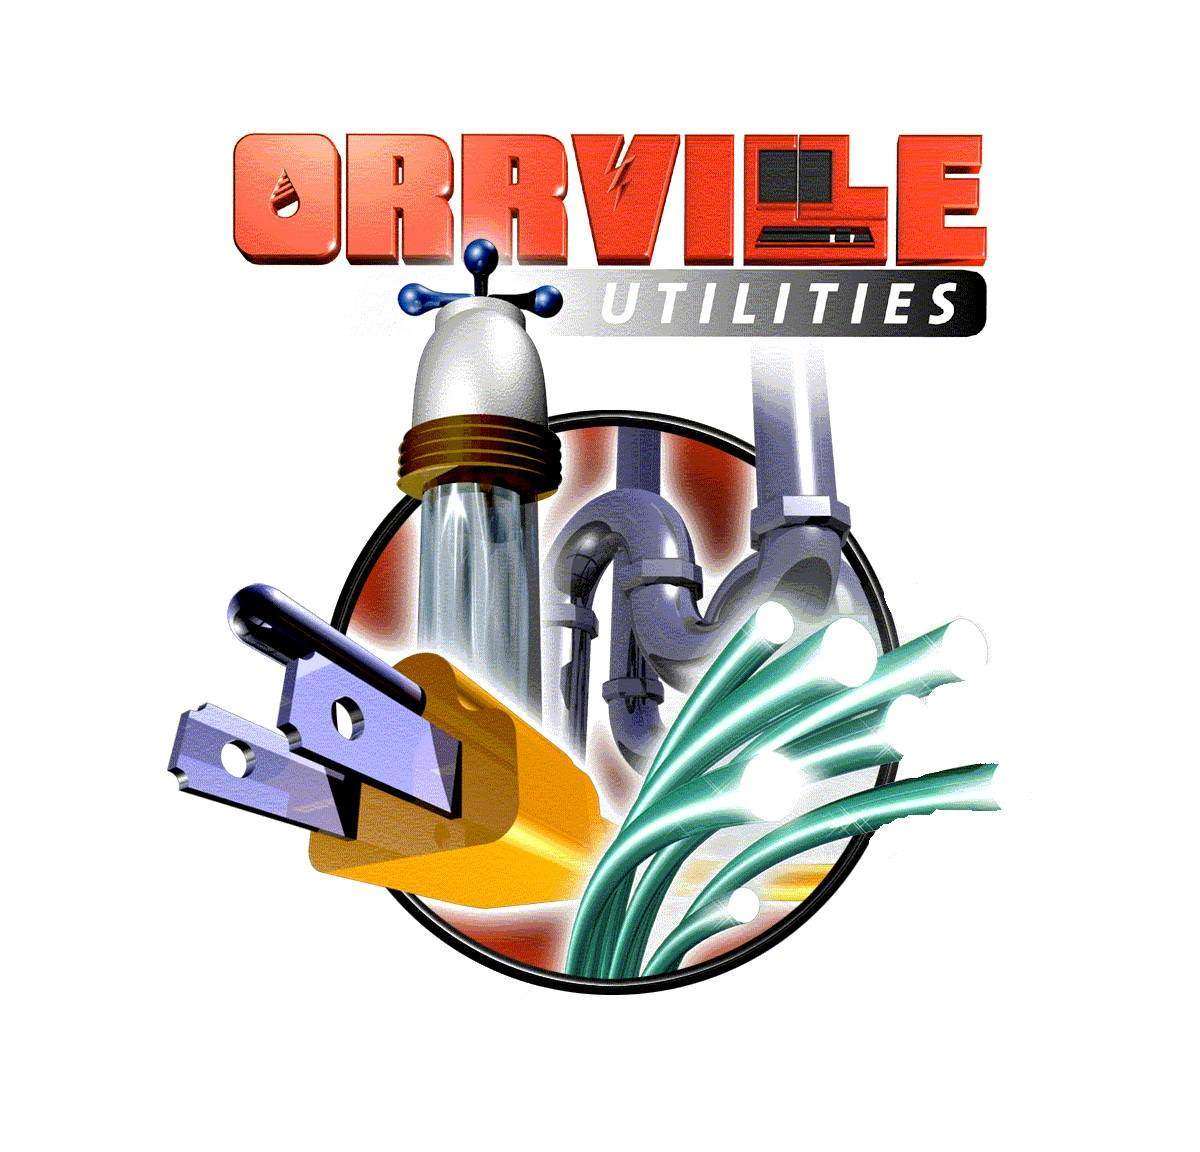 The City of Orrville